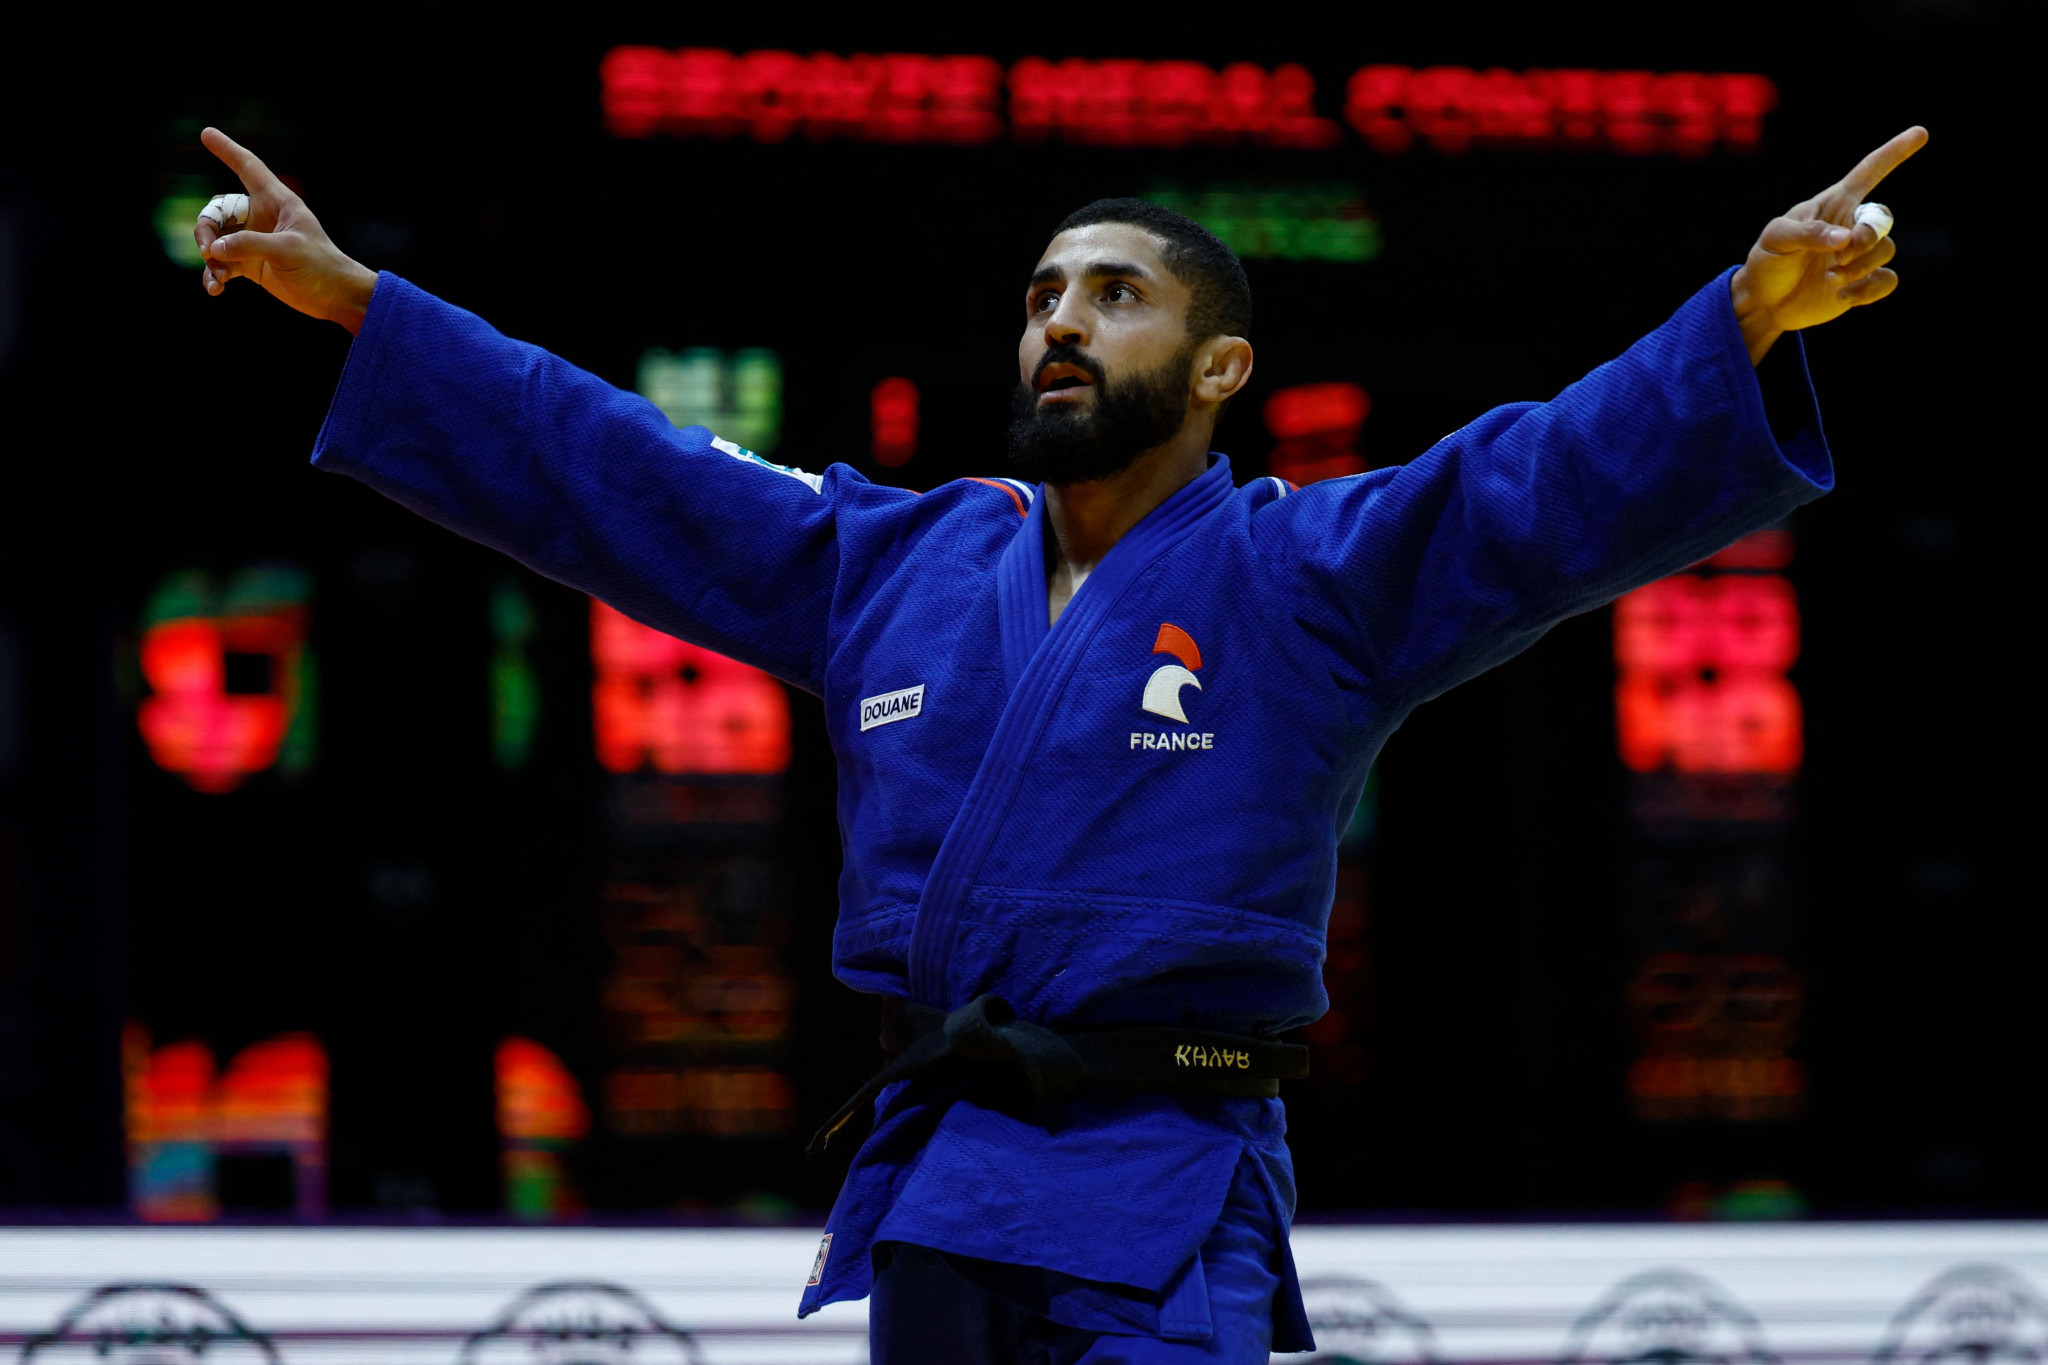 France's Walide Khyar boosted his hopes of glory at the Paris 2024 Olympics by claiming his first World Championships medal ©Getty Images